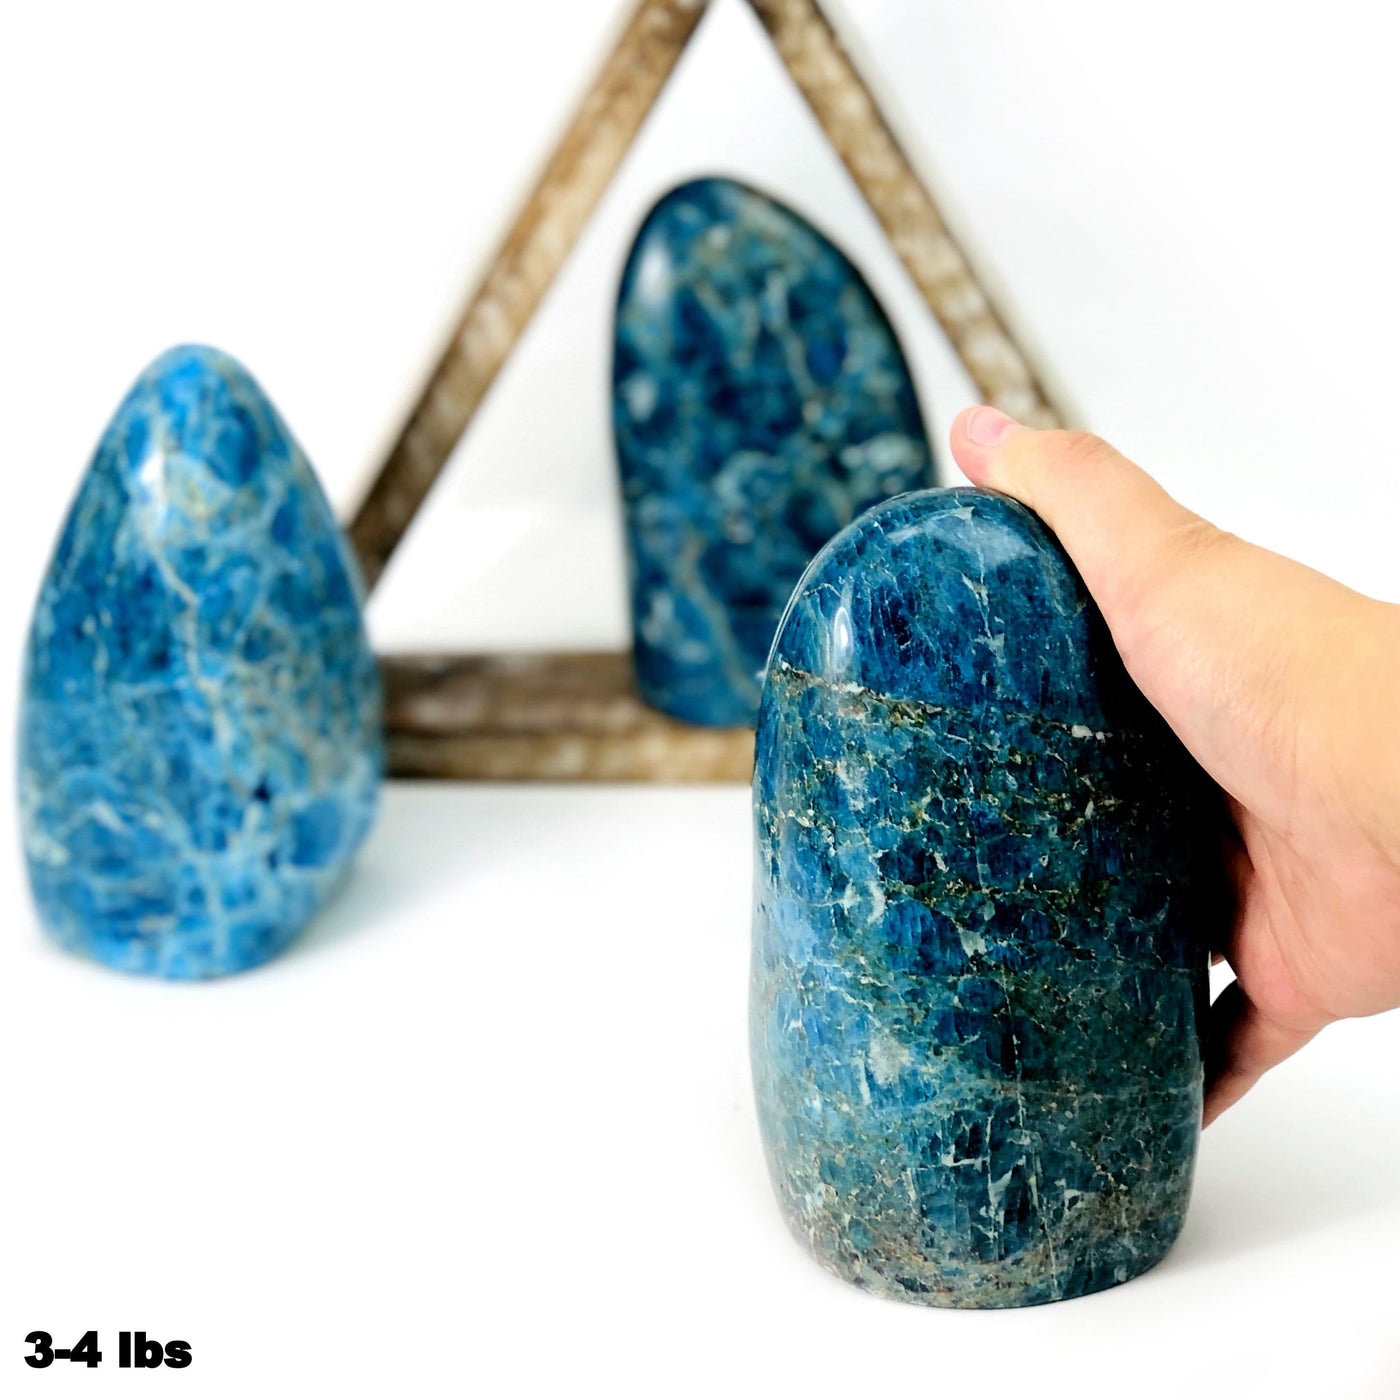 hand holding blue apatite polished cut base in 3-4 lbs with 2 others blurred in the background